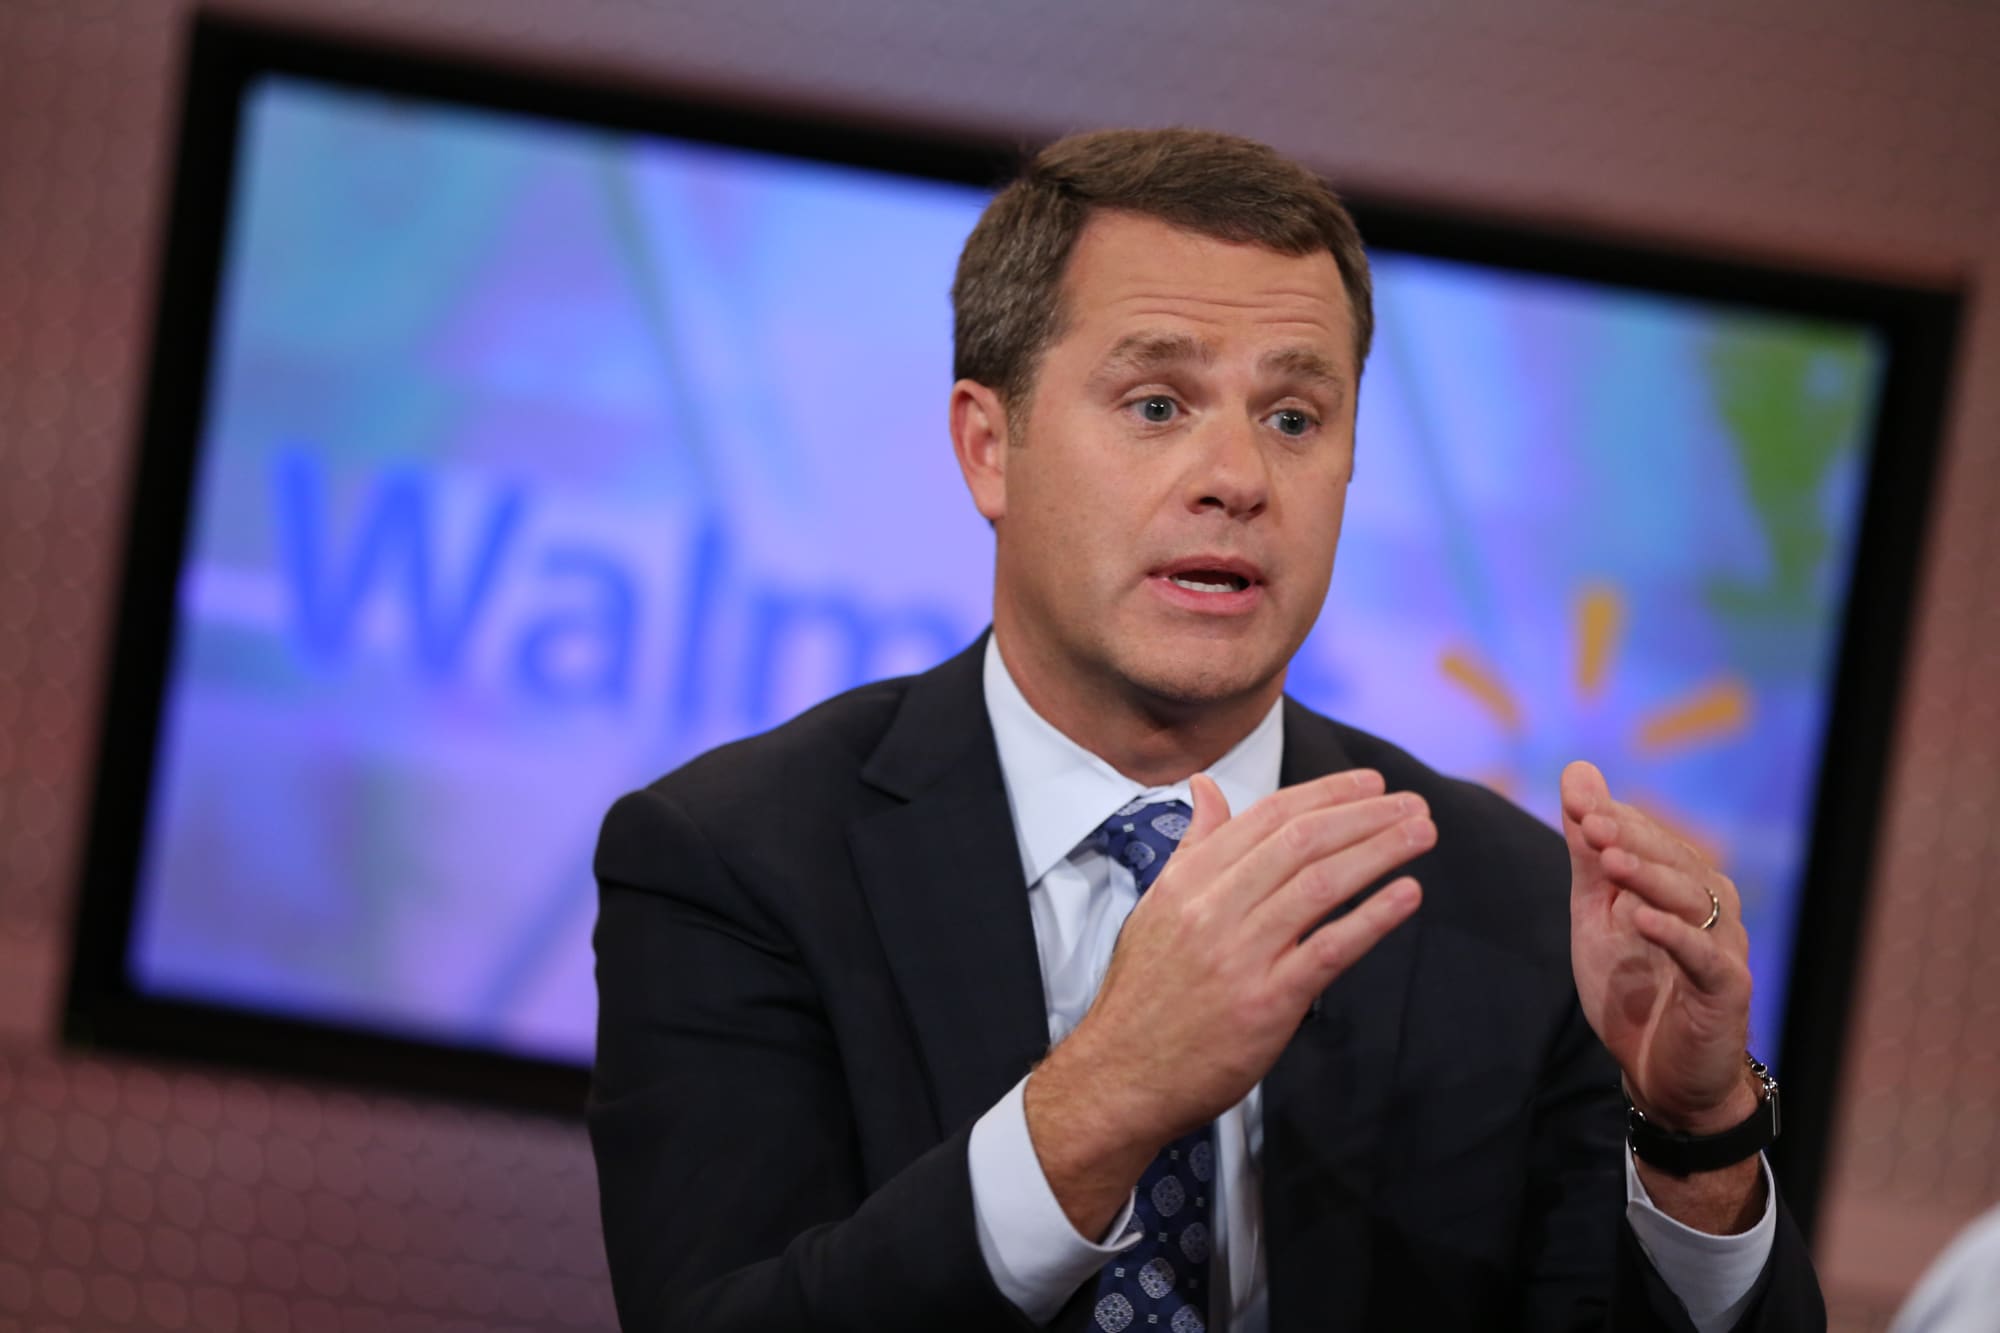 The memo from Walmart's CEO about pulling back on ammunition sales